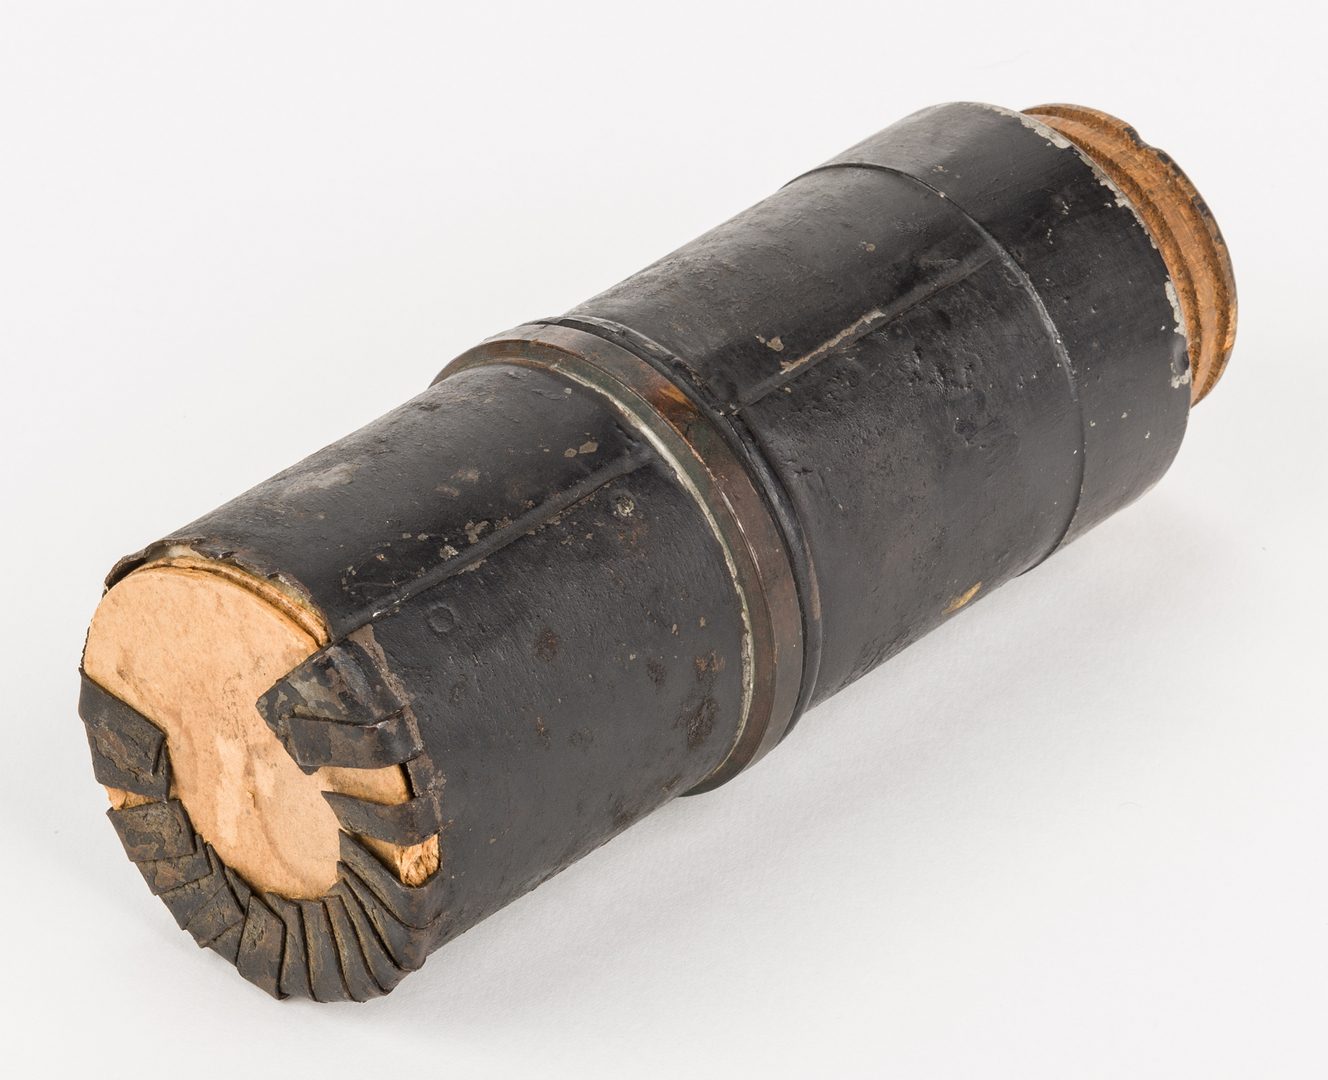 Lot 225: US Civil War Canister Round